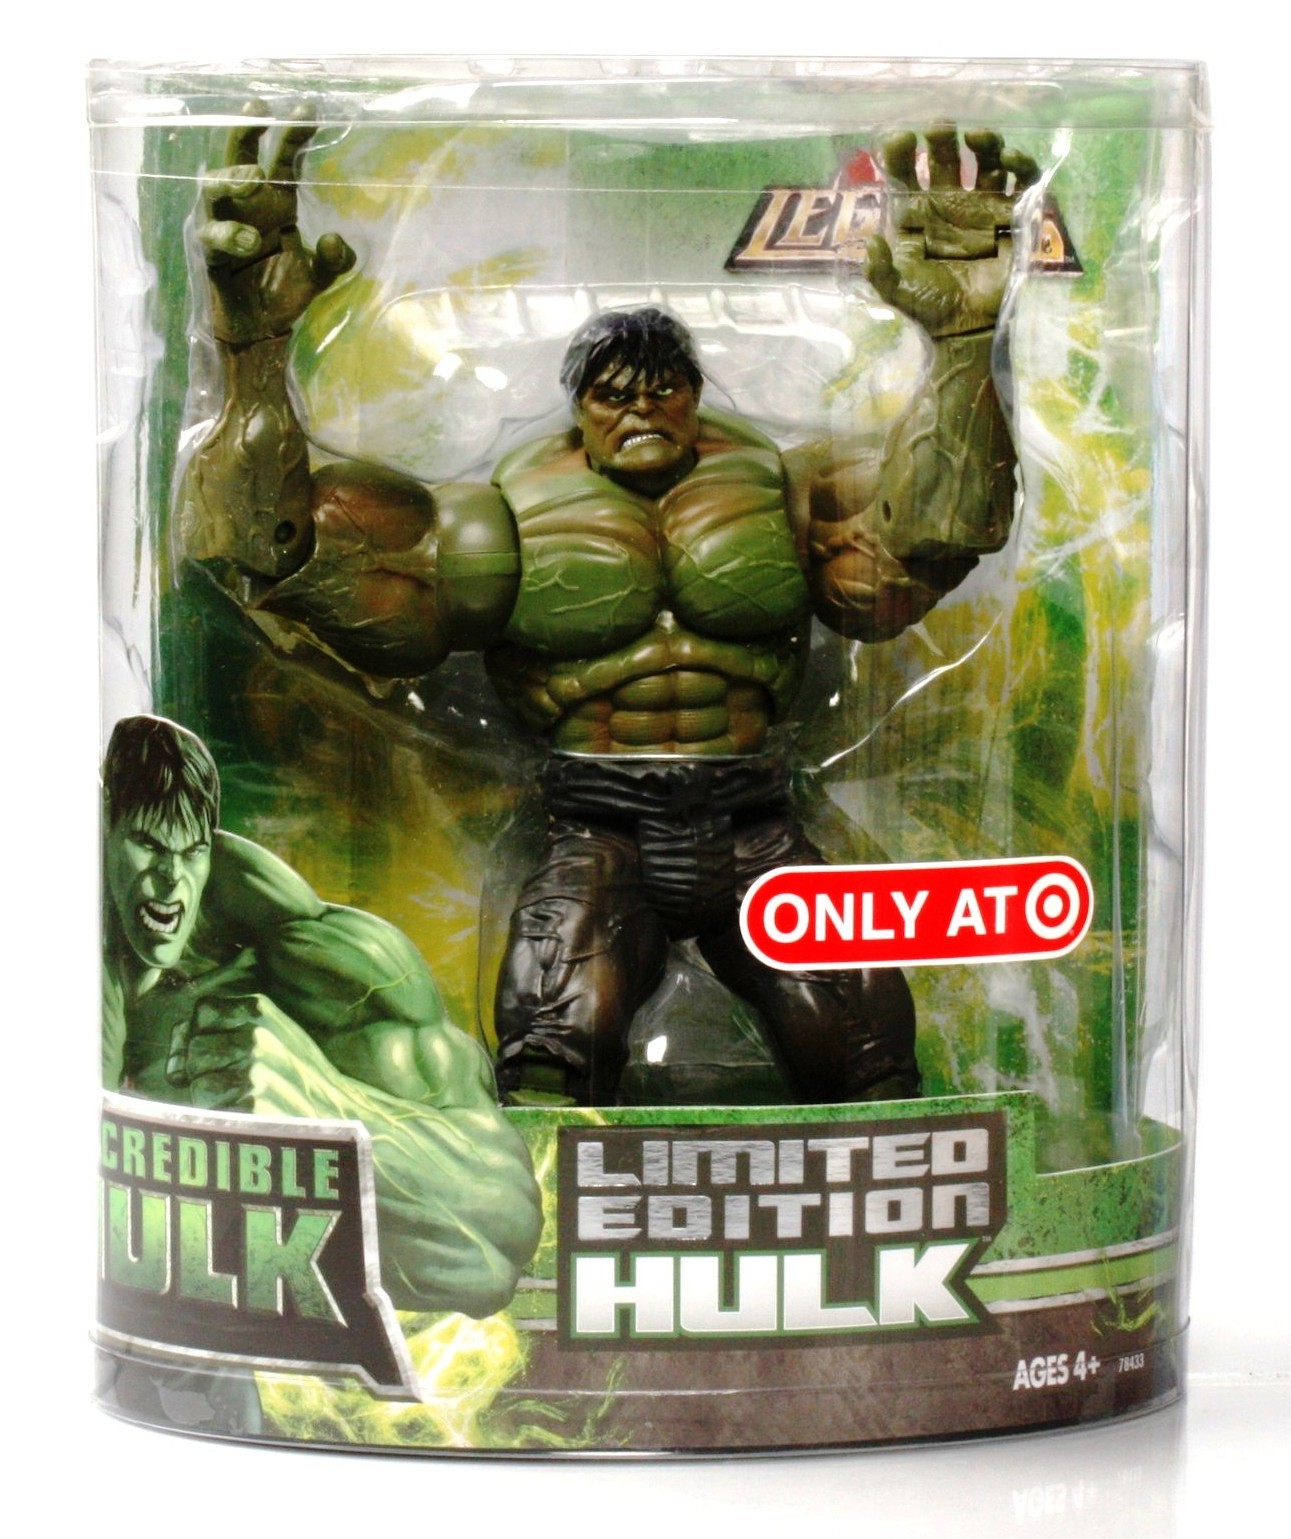 New The Avengers The Incredible Hulk Action figure Movie 19.5 cm 7.7" inch Gift 